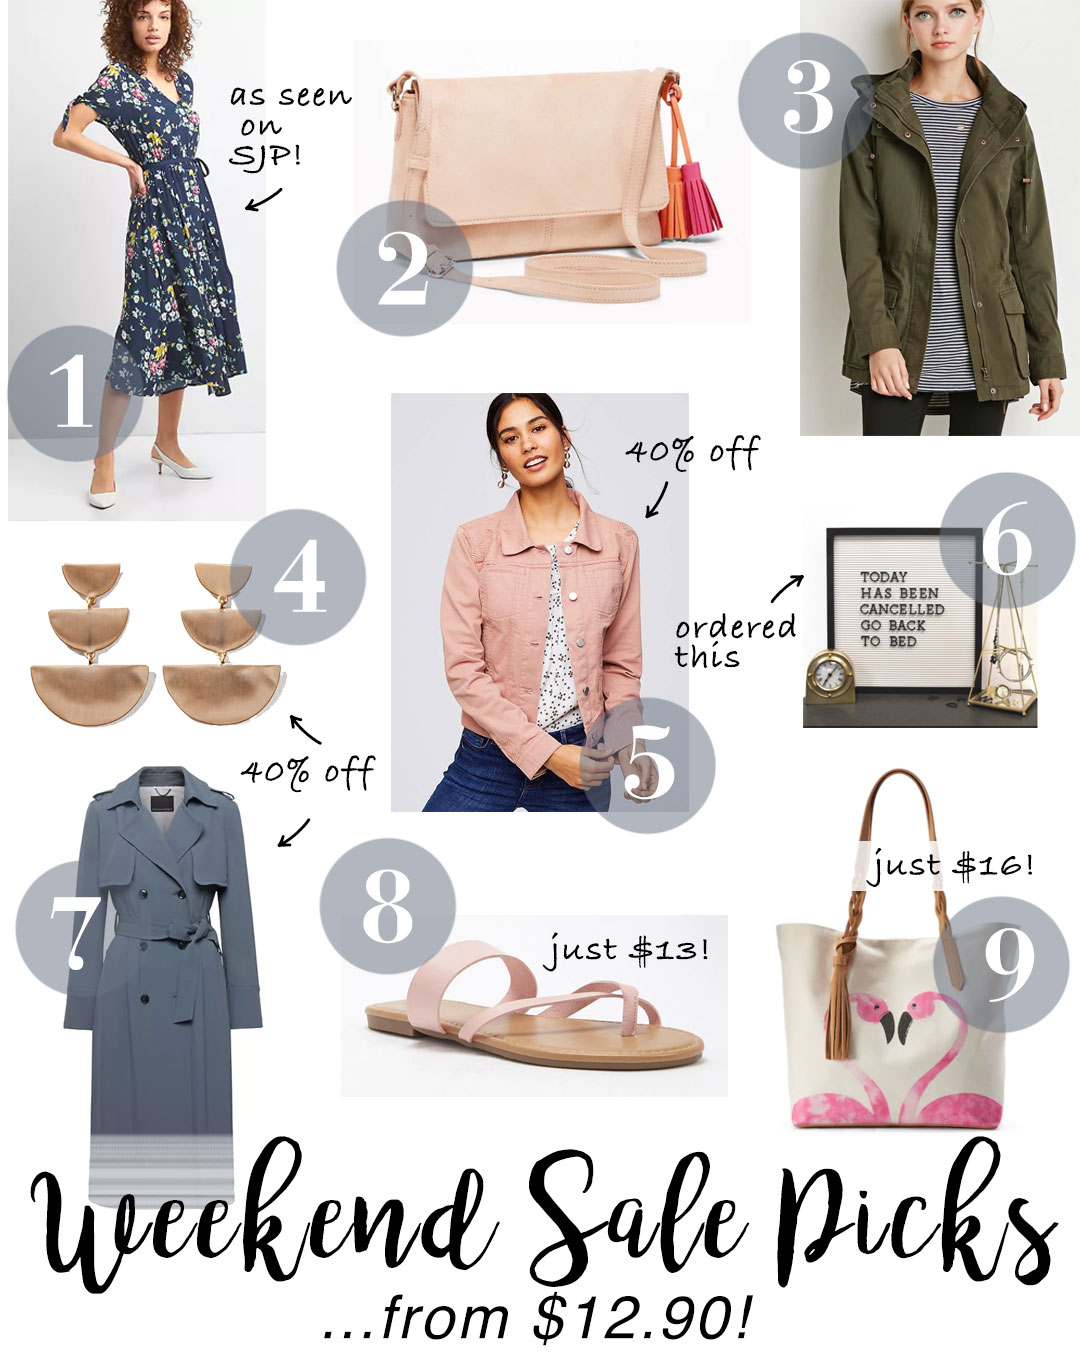 Best weekend sales to shop now! Finds from $12.90